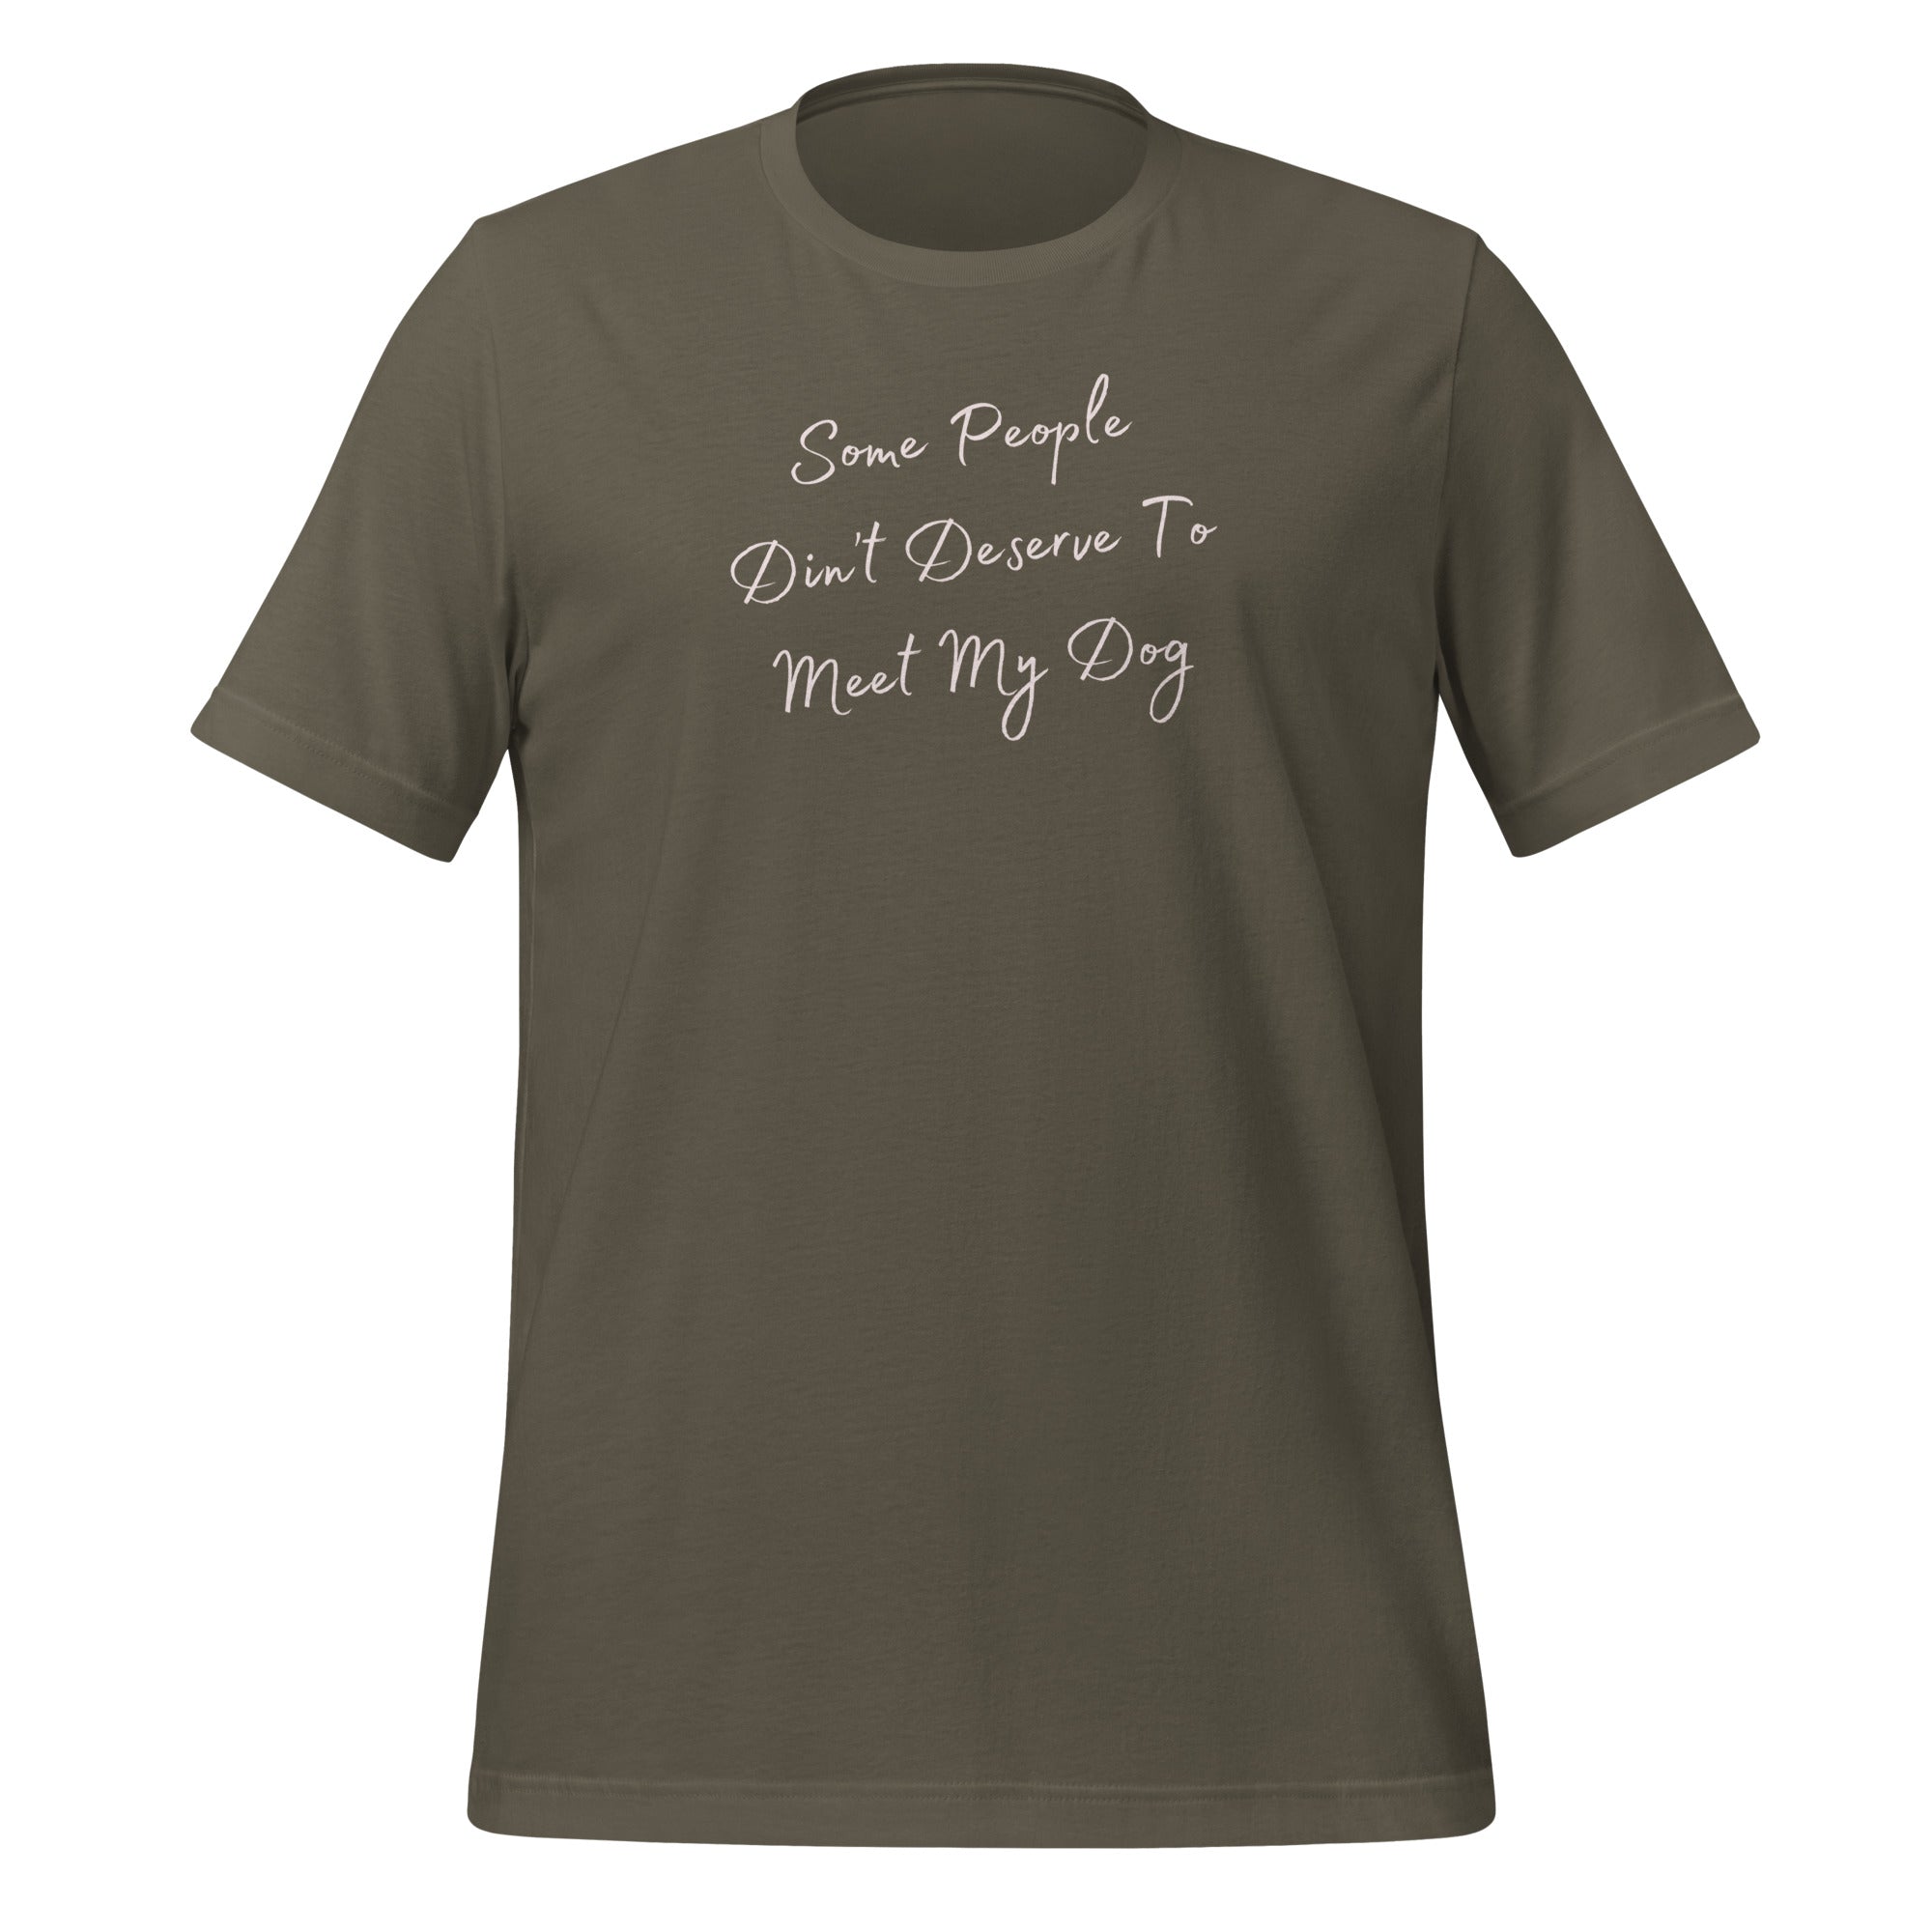 Some people didn't deserve to meet my dog Unisex t-shirt